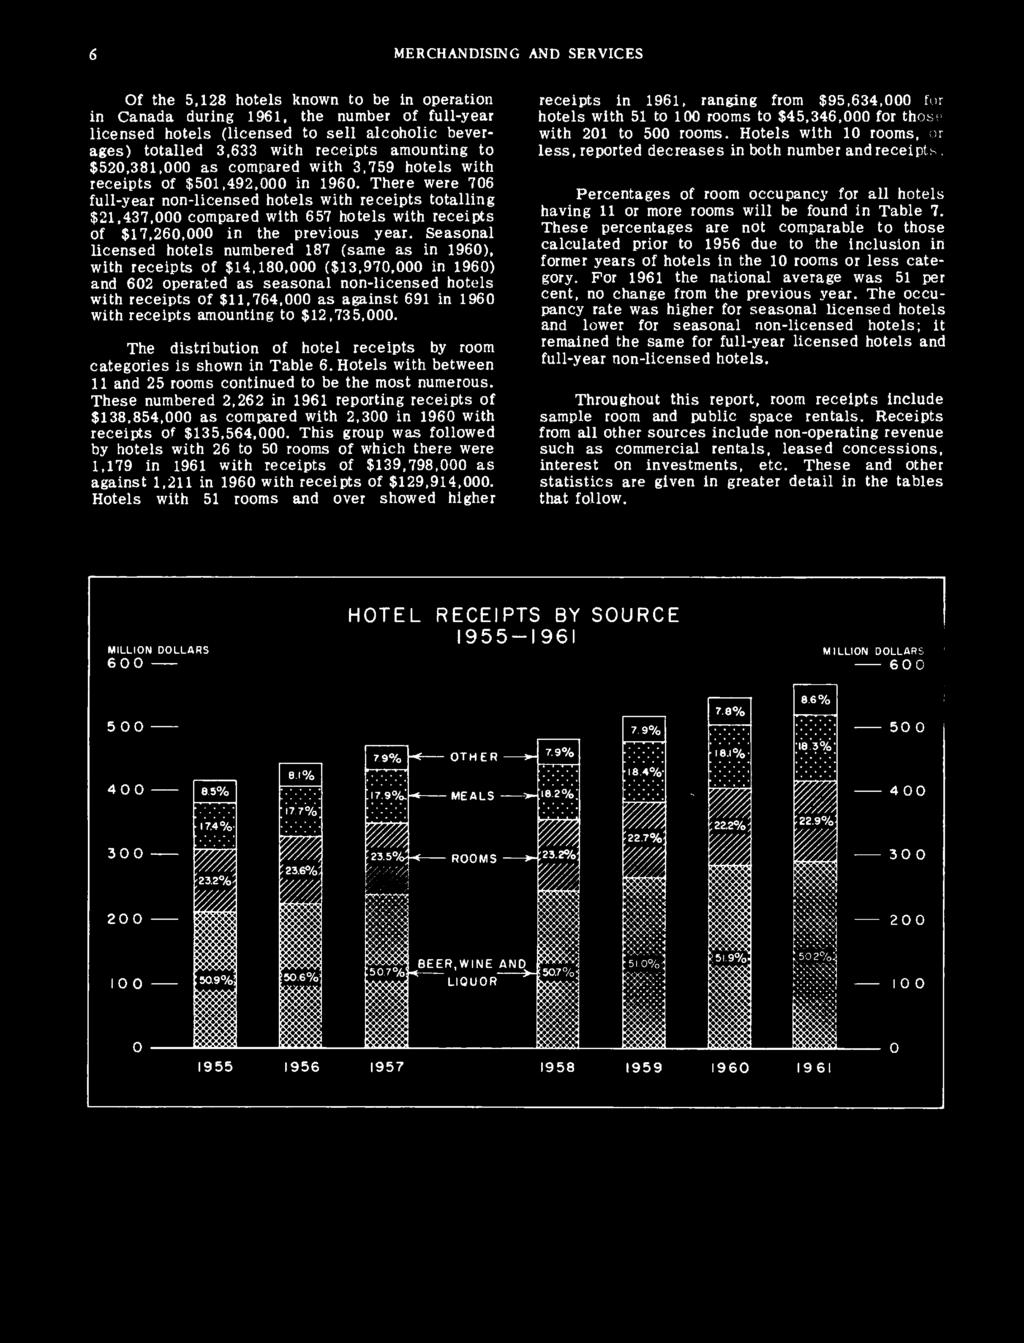 691 in 1960 with receipts amounting to $12,735,000. The distribution of hotel receipts by room categories is shown in Table 6. Hotels with between 11 and 25 rooms continued to be the most numerous.